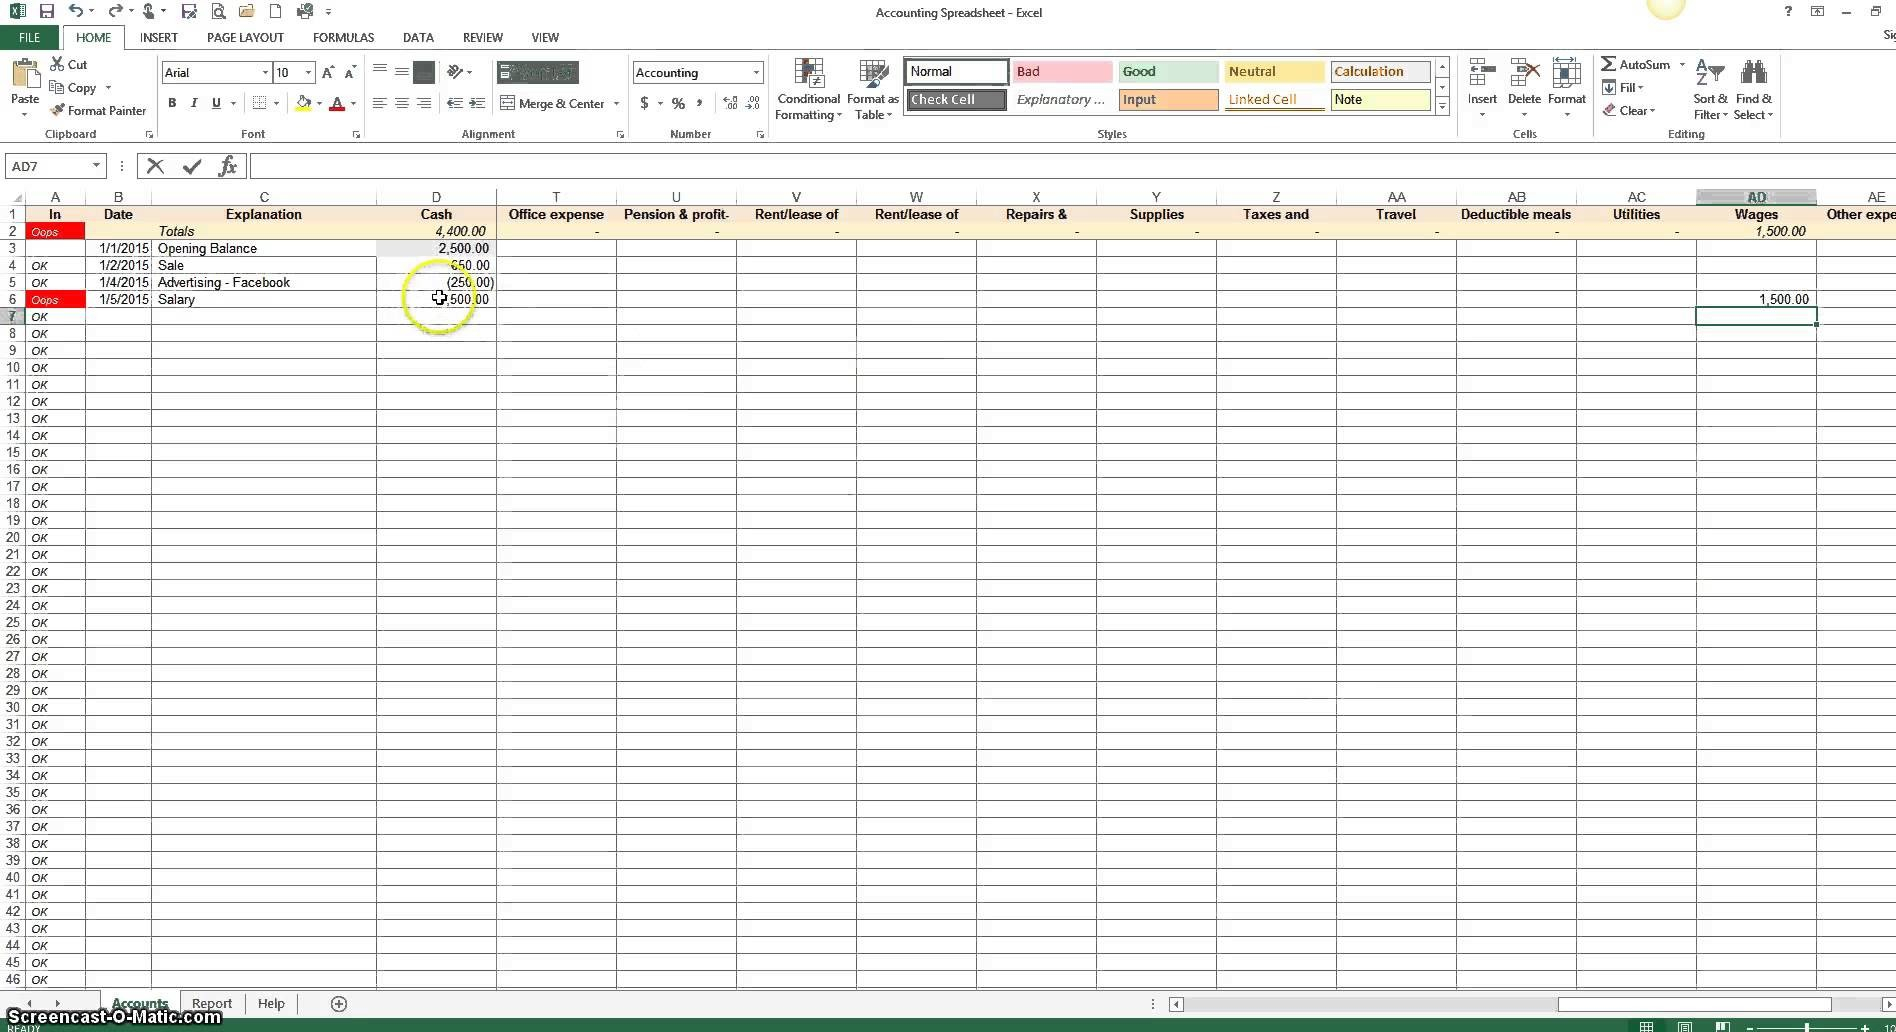 Free Accounting Spreadsheet Templates For Small Business As Excel in Free Excel Spreadsheet Templates For Small Business